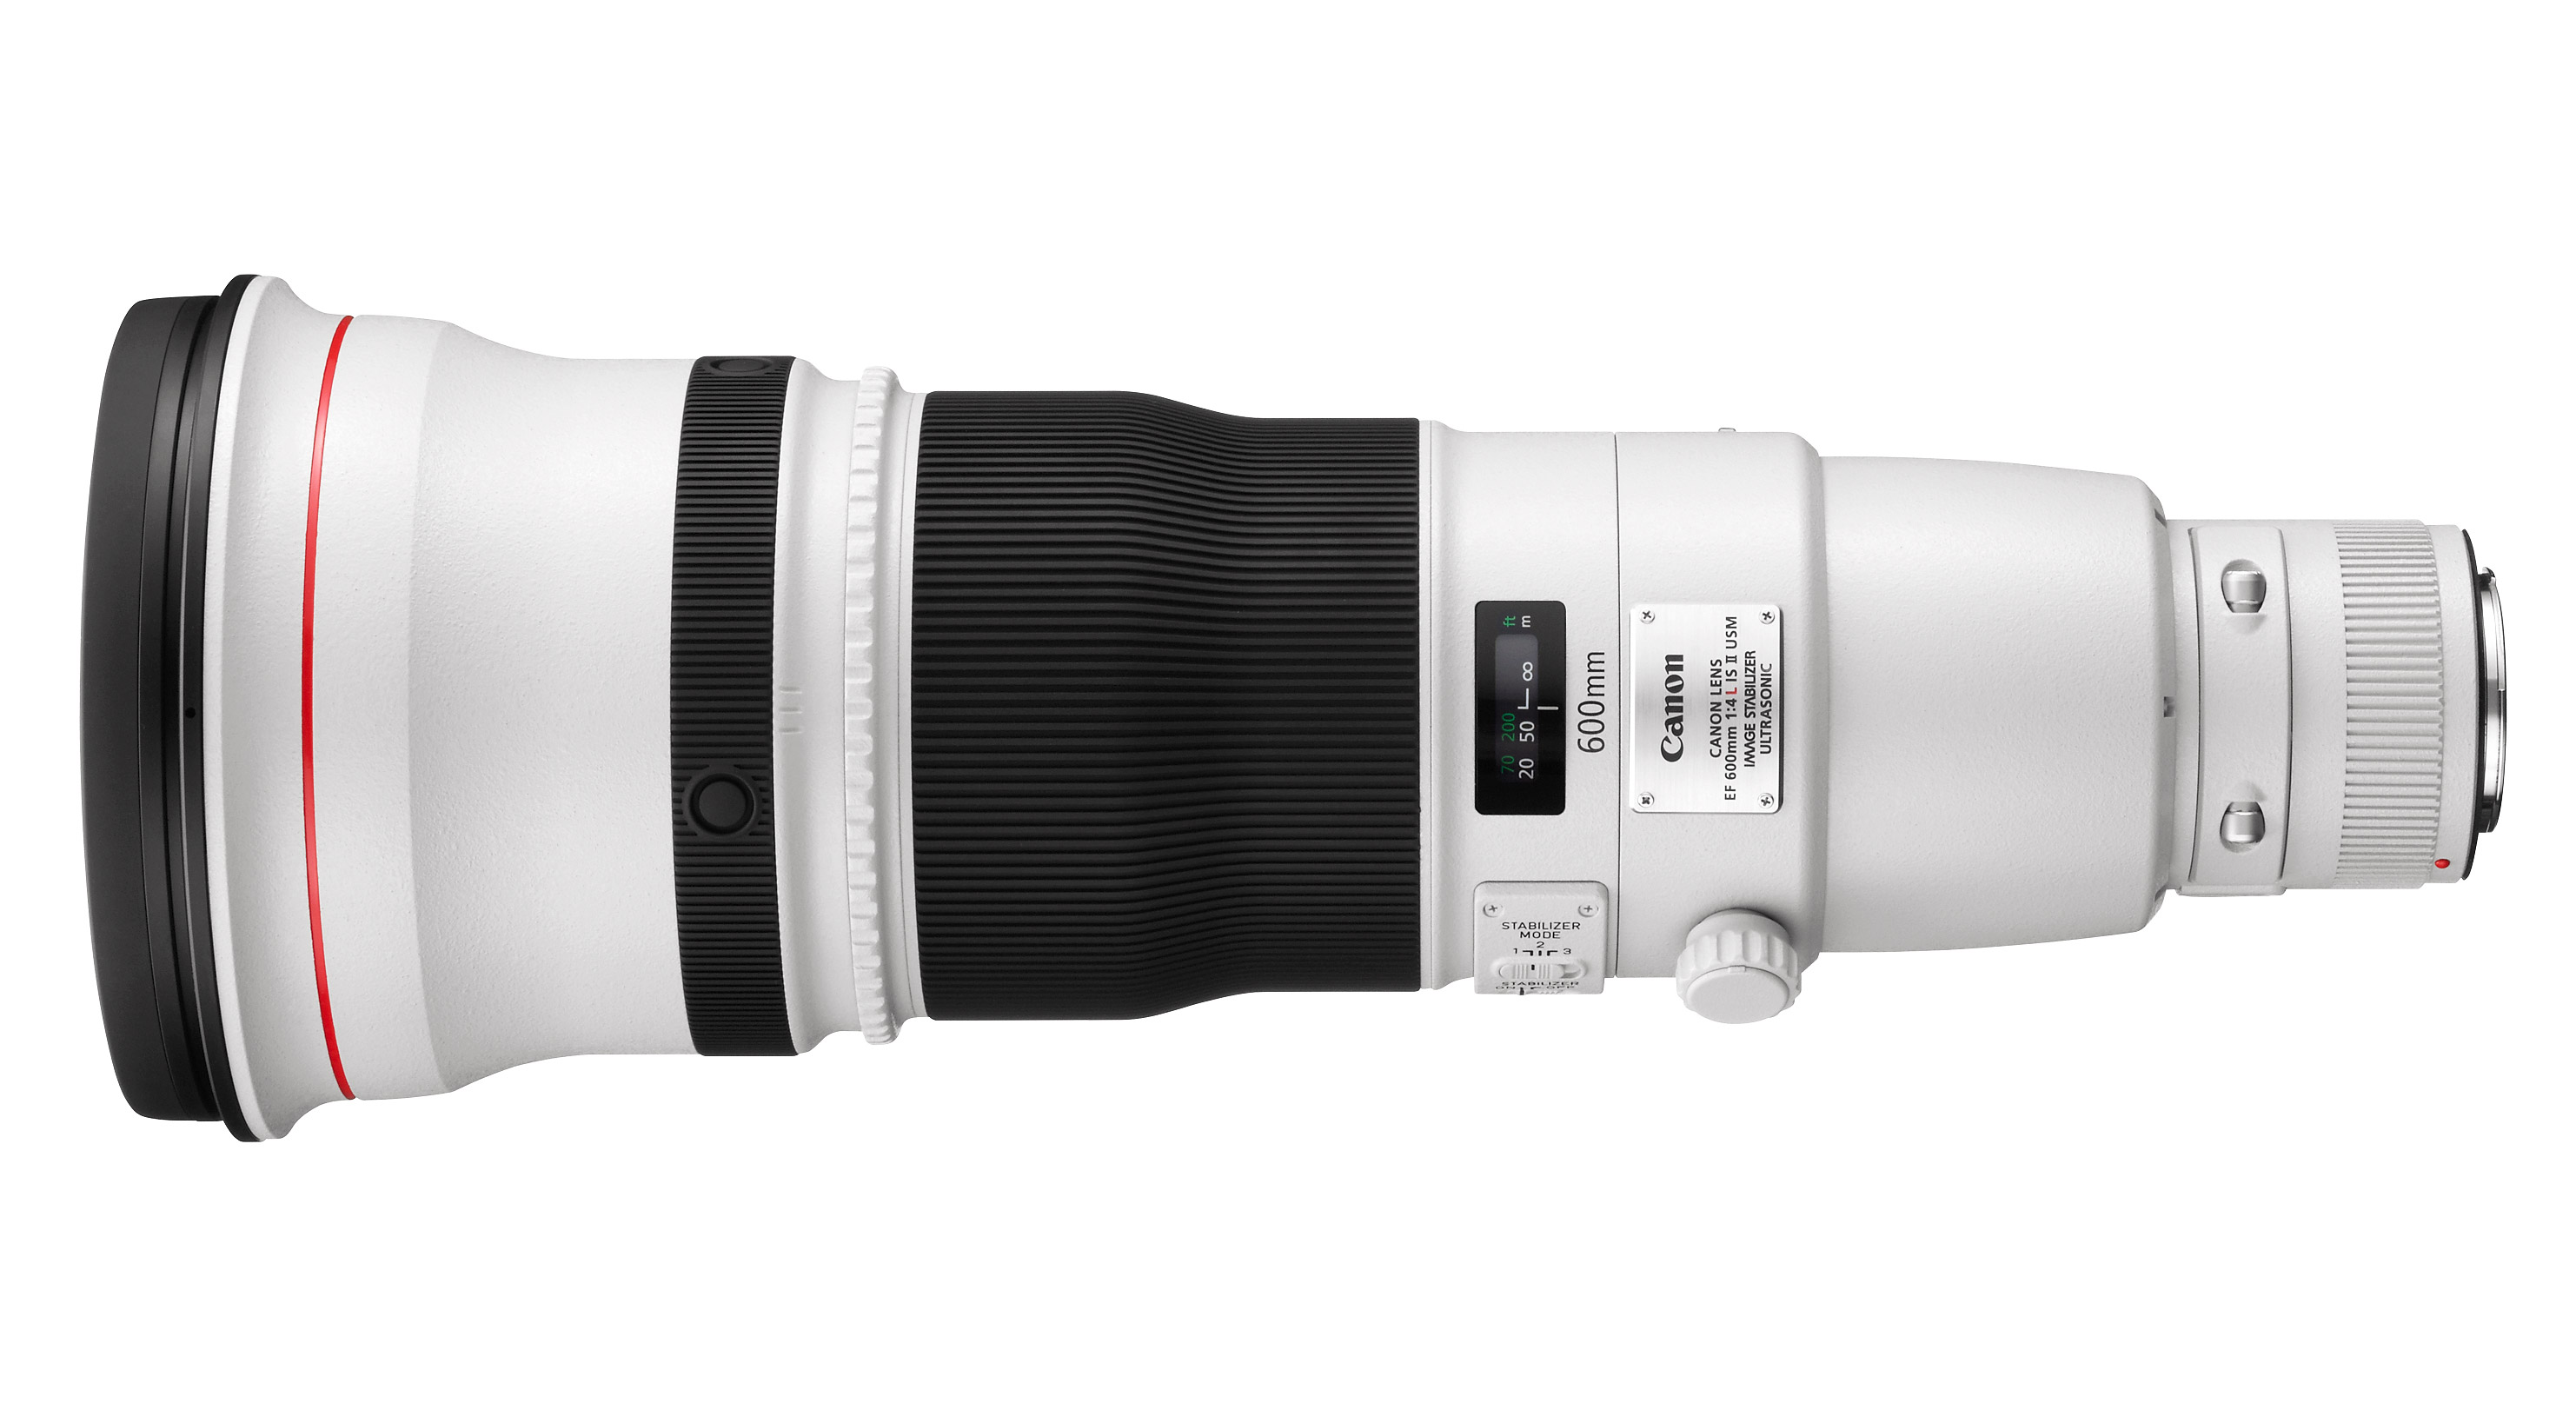 Canon EF 600mm f/4 L IS II USM